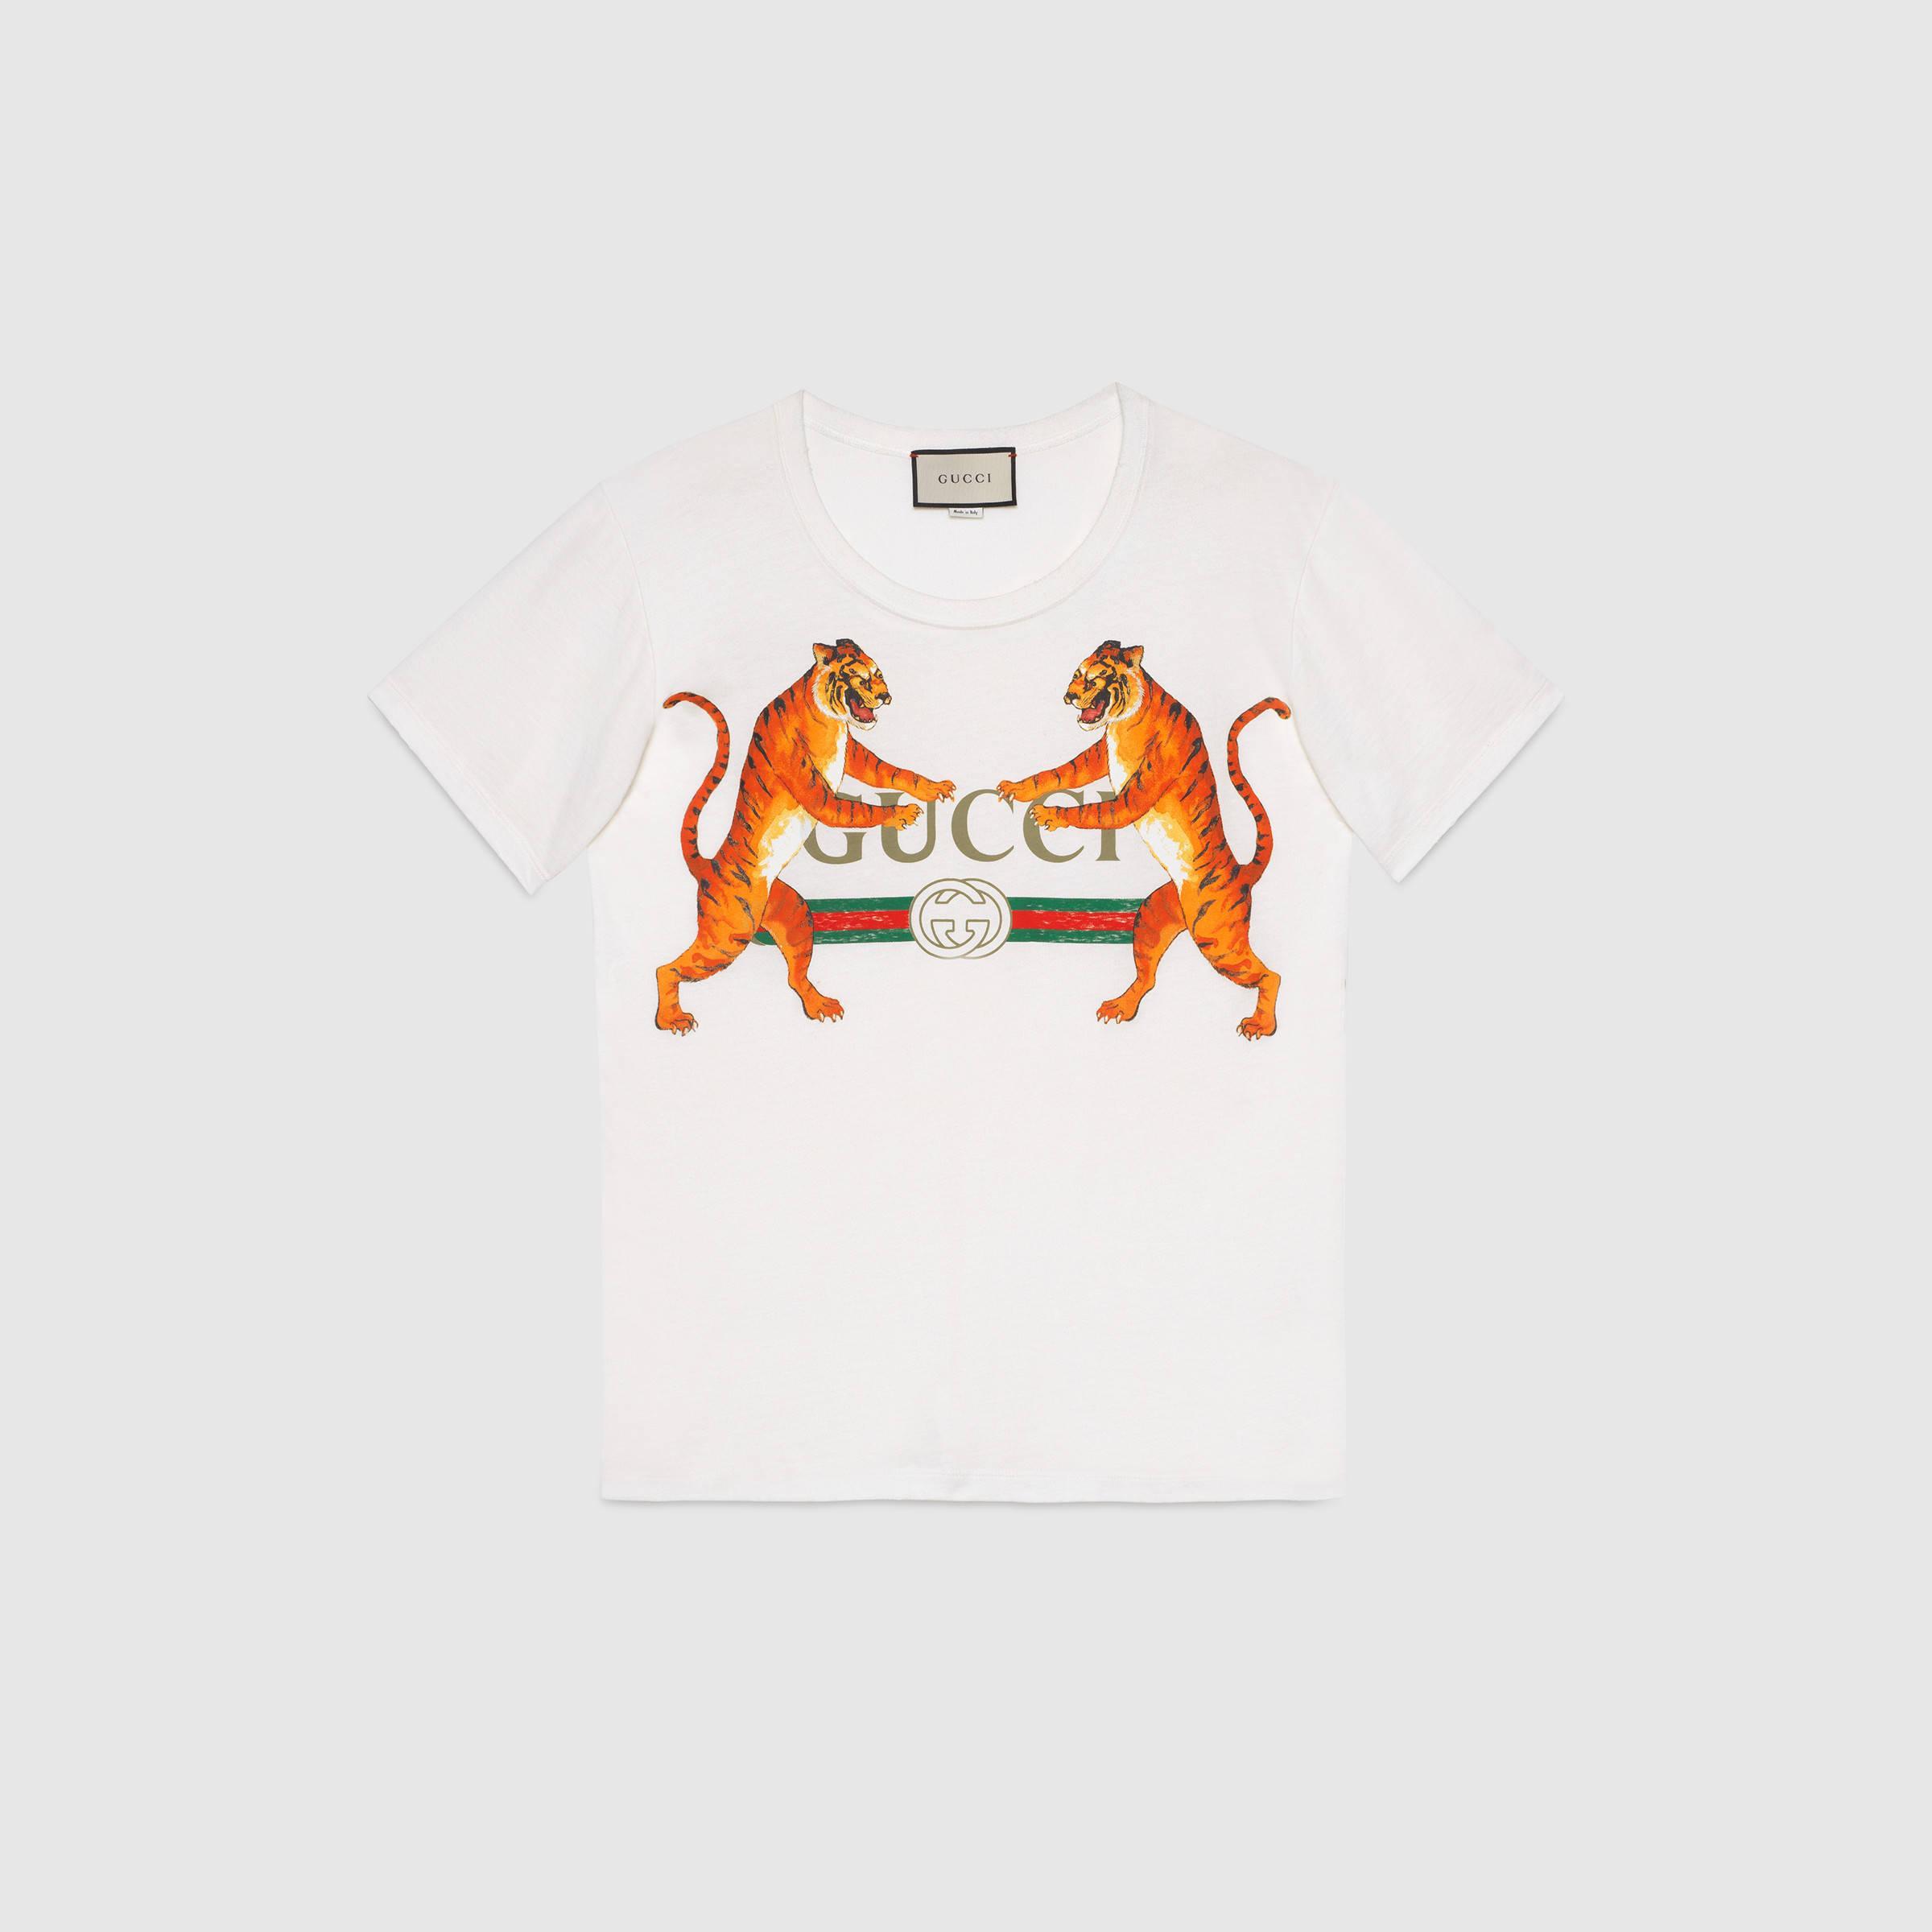 Real Gucci Logo - Discount Real Gucci Gucci logo with tigers T-shirt For Sale : Cheap ...